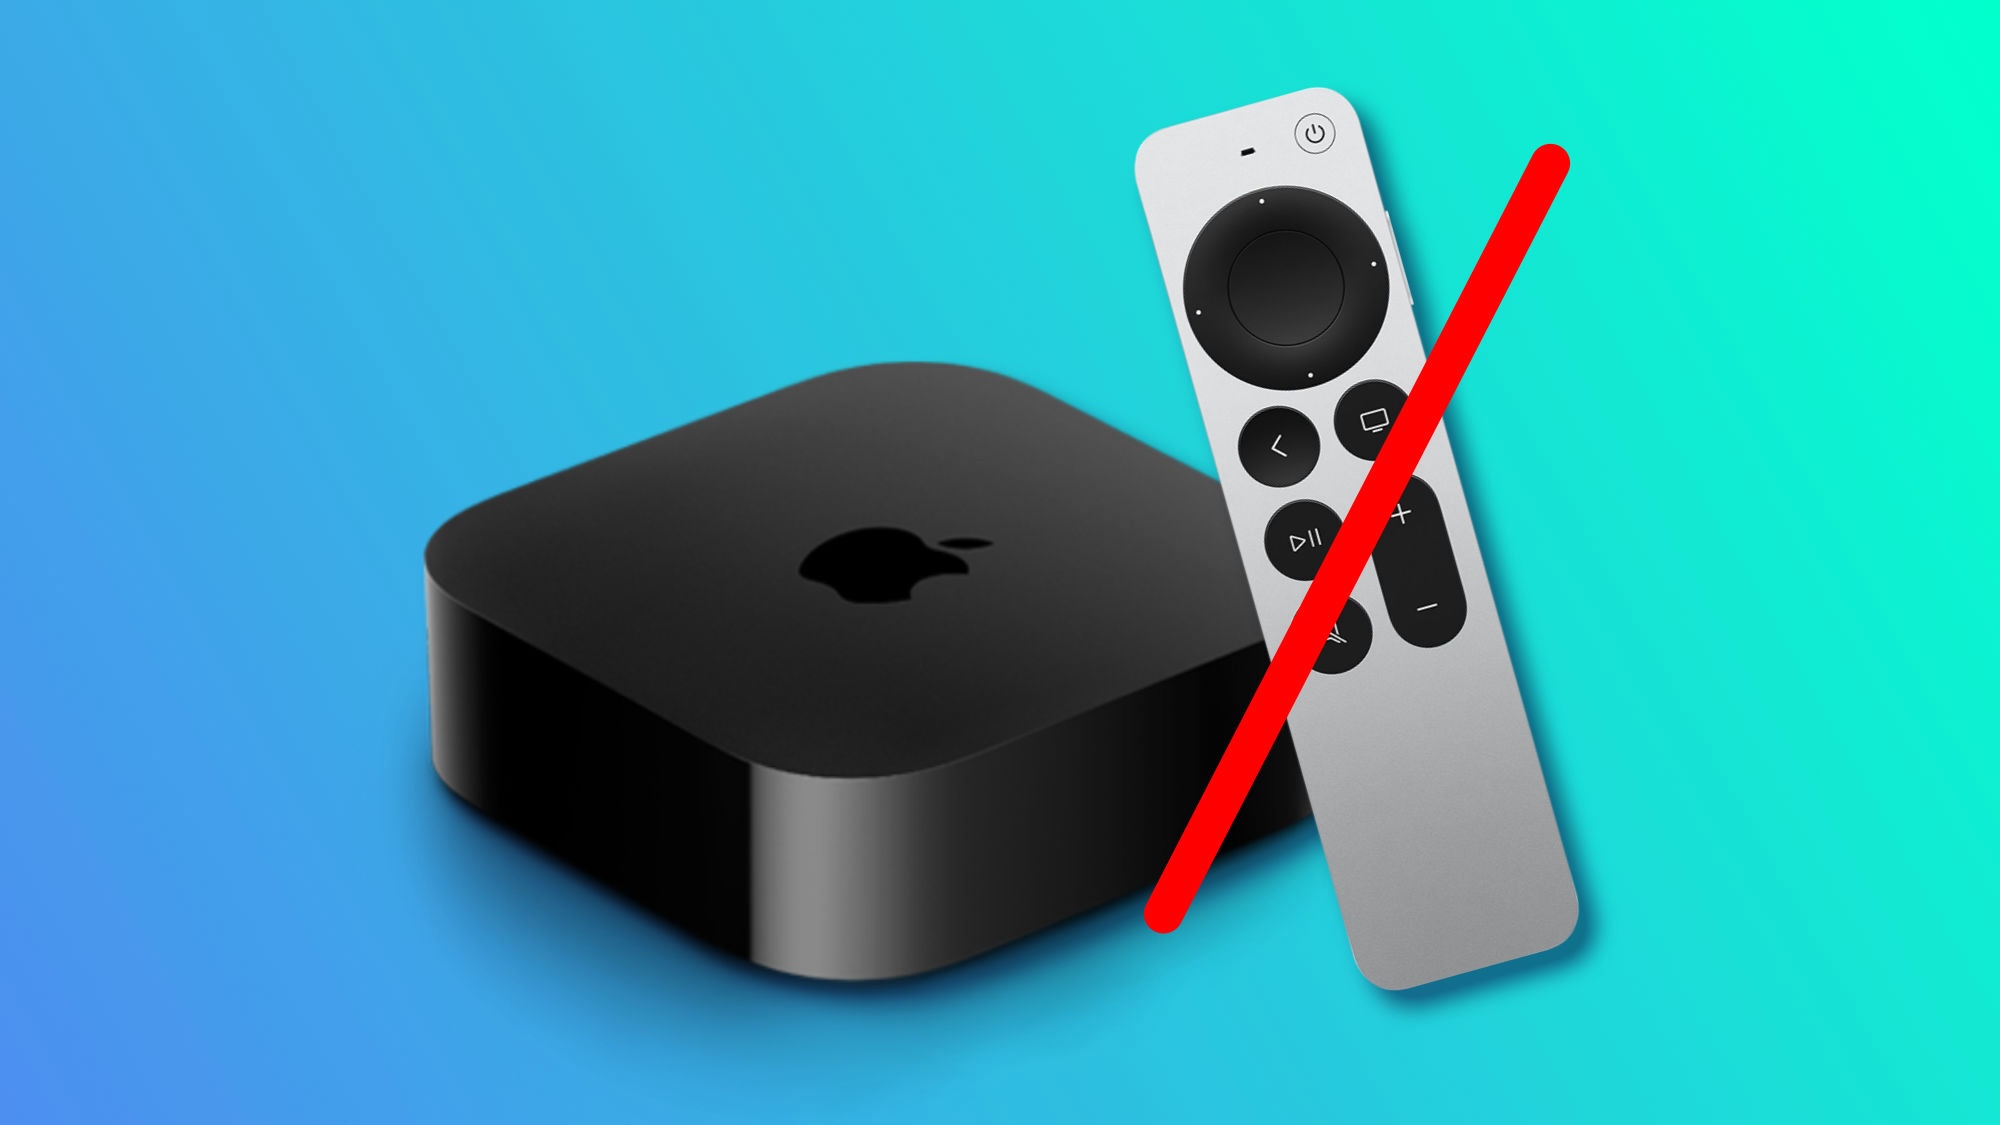 How to use the Apple TV without a remote